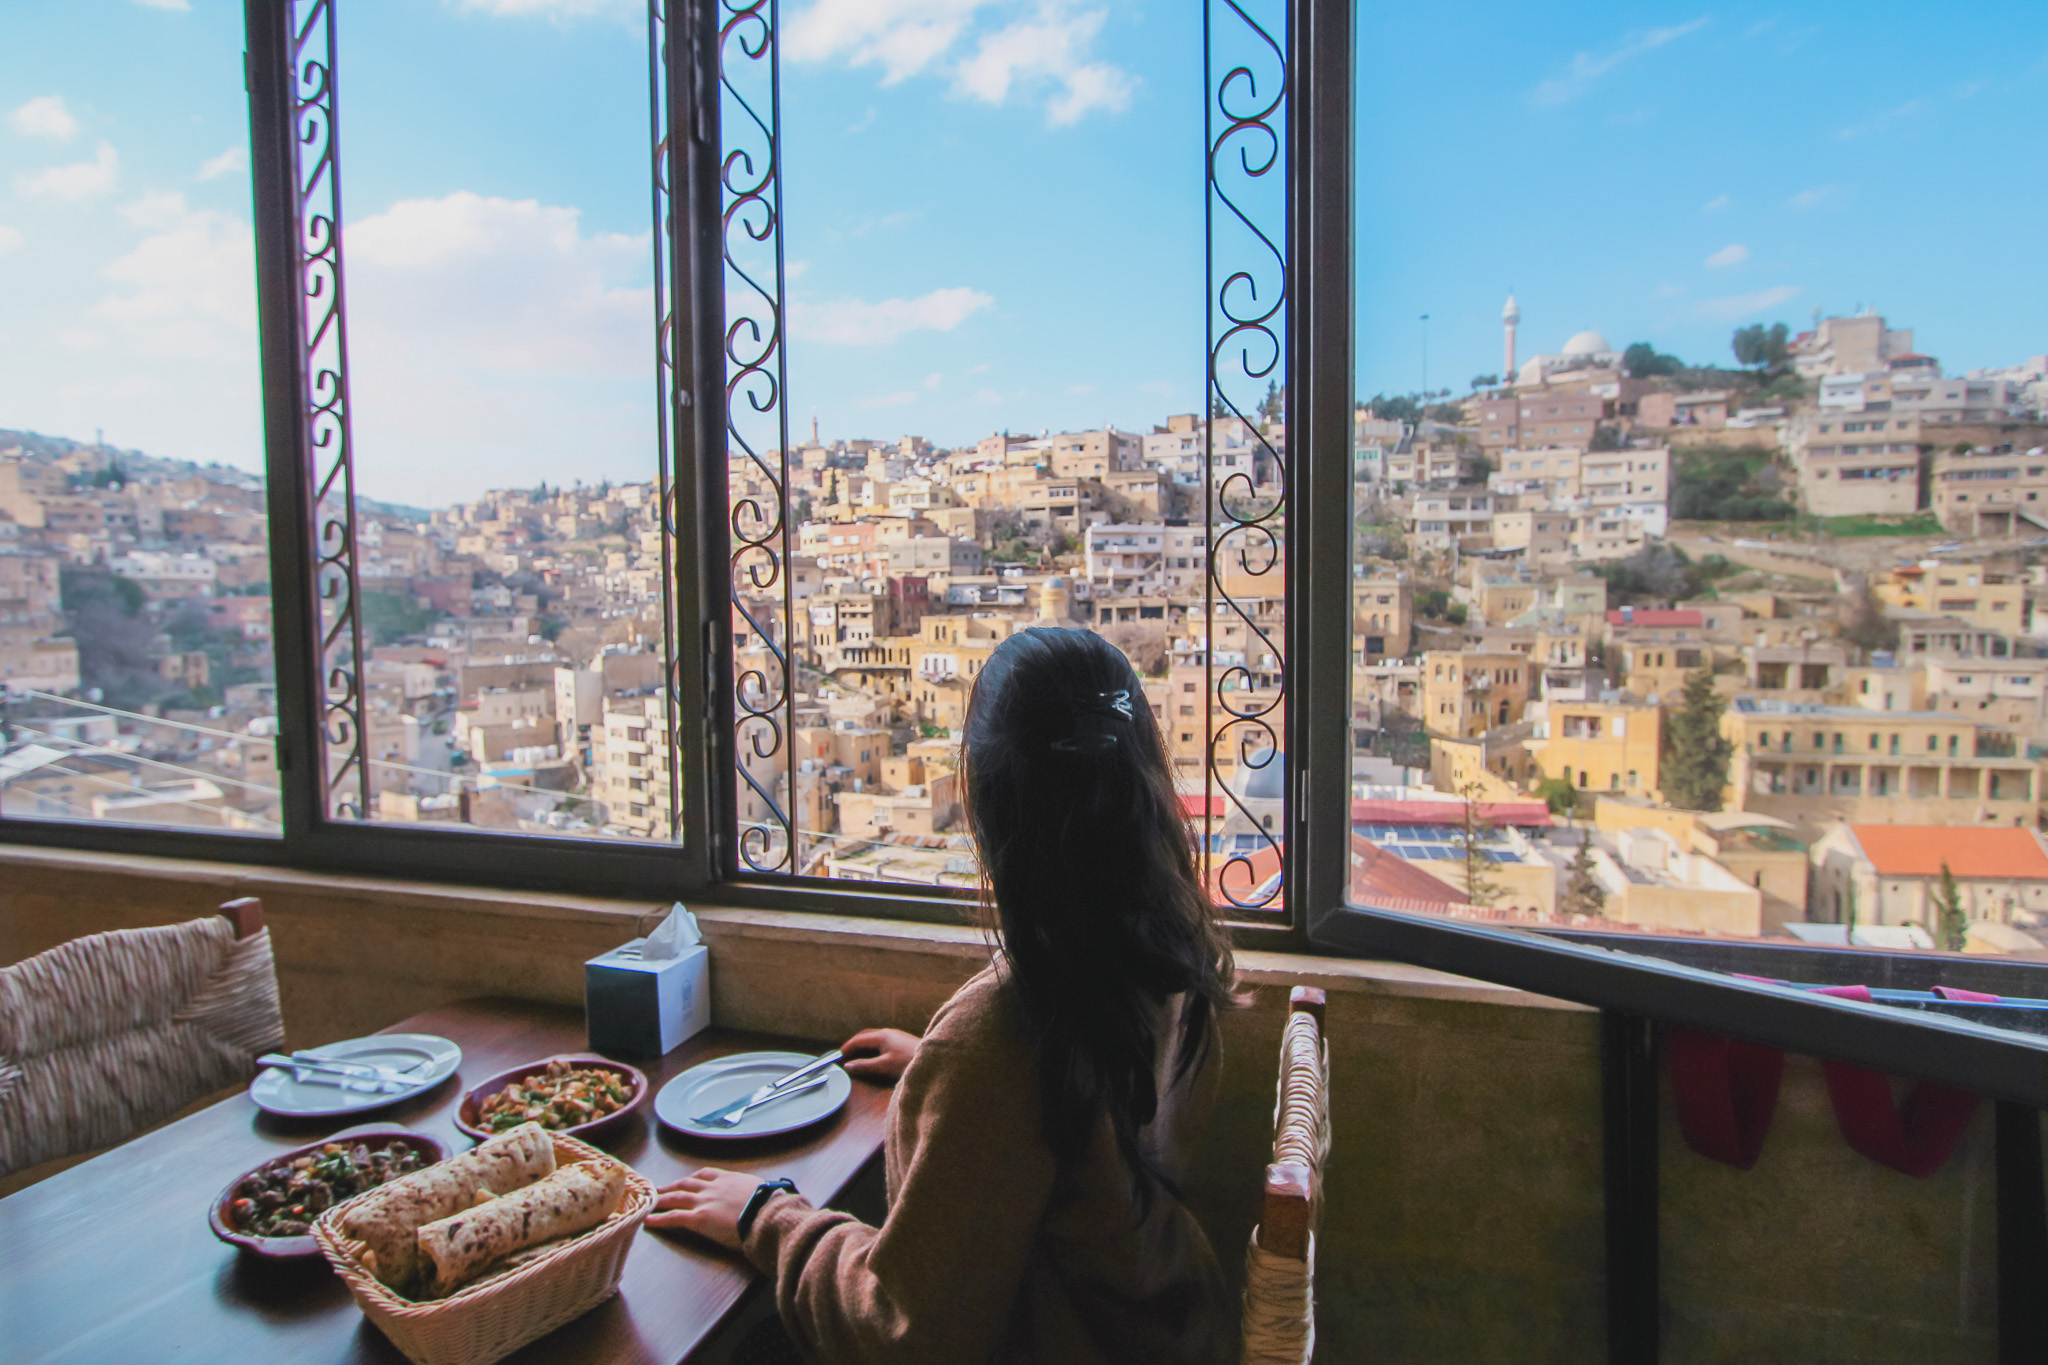 Meal at Beit Aziz Restaurant with a view to As-Salt